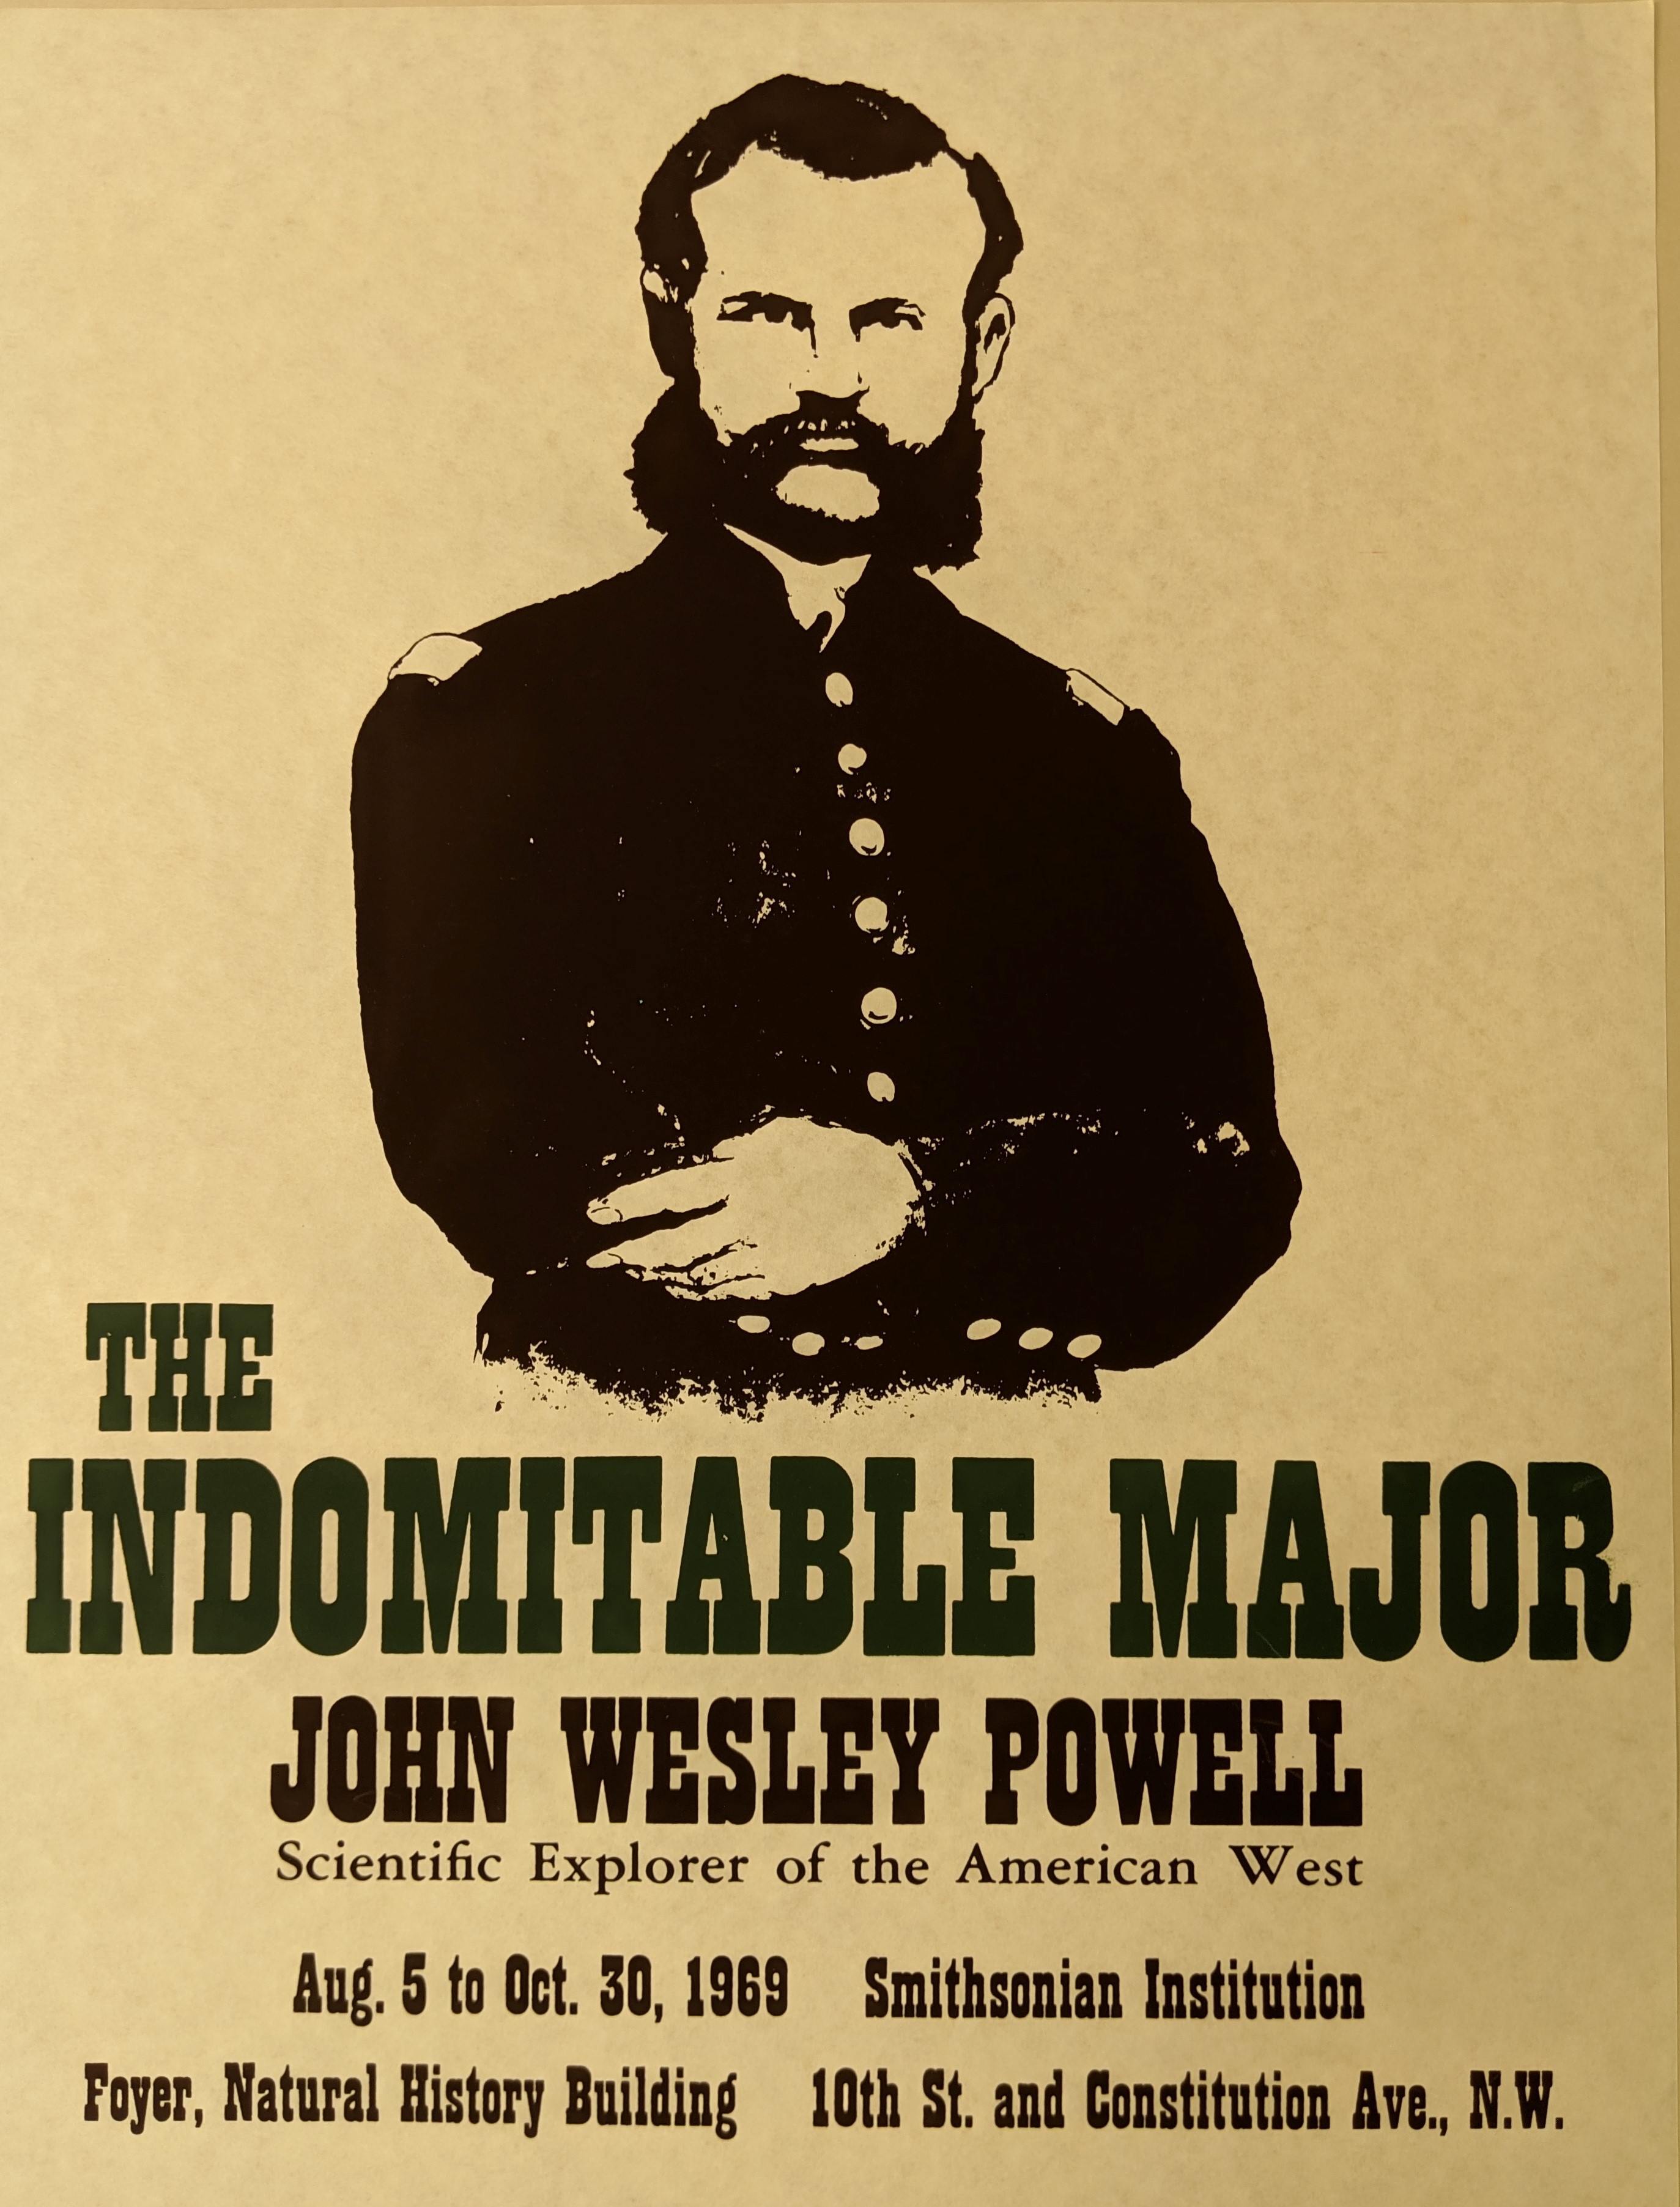 Poster with parchment color background and portrait of John Wesley Powell.